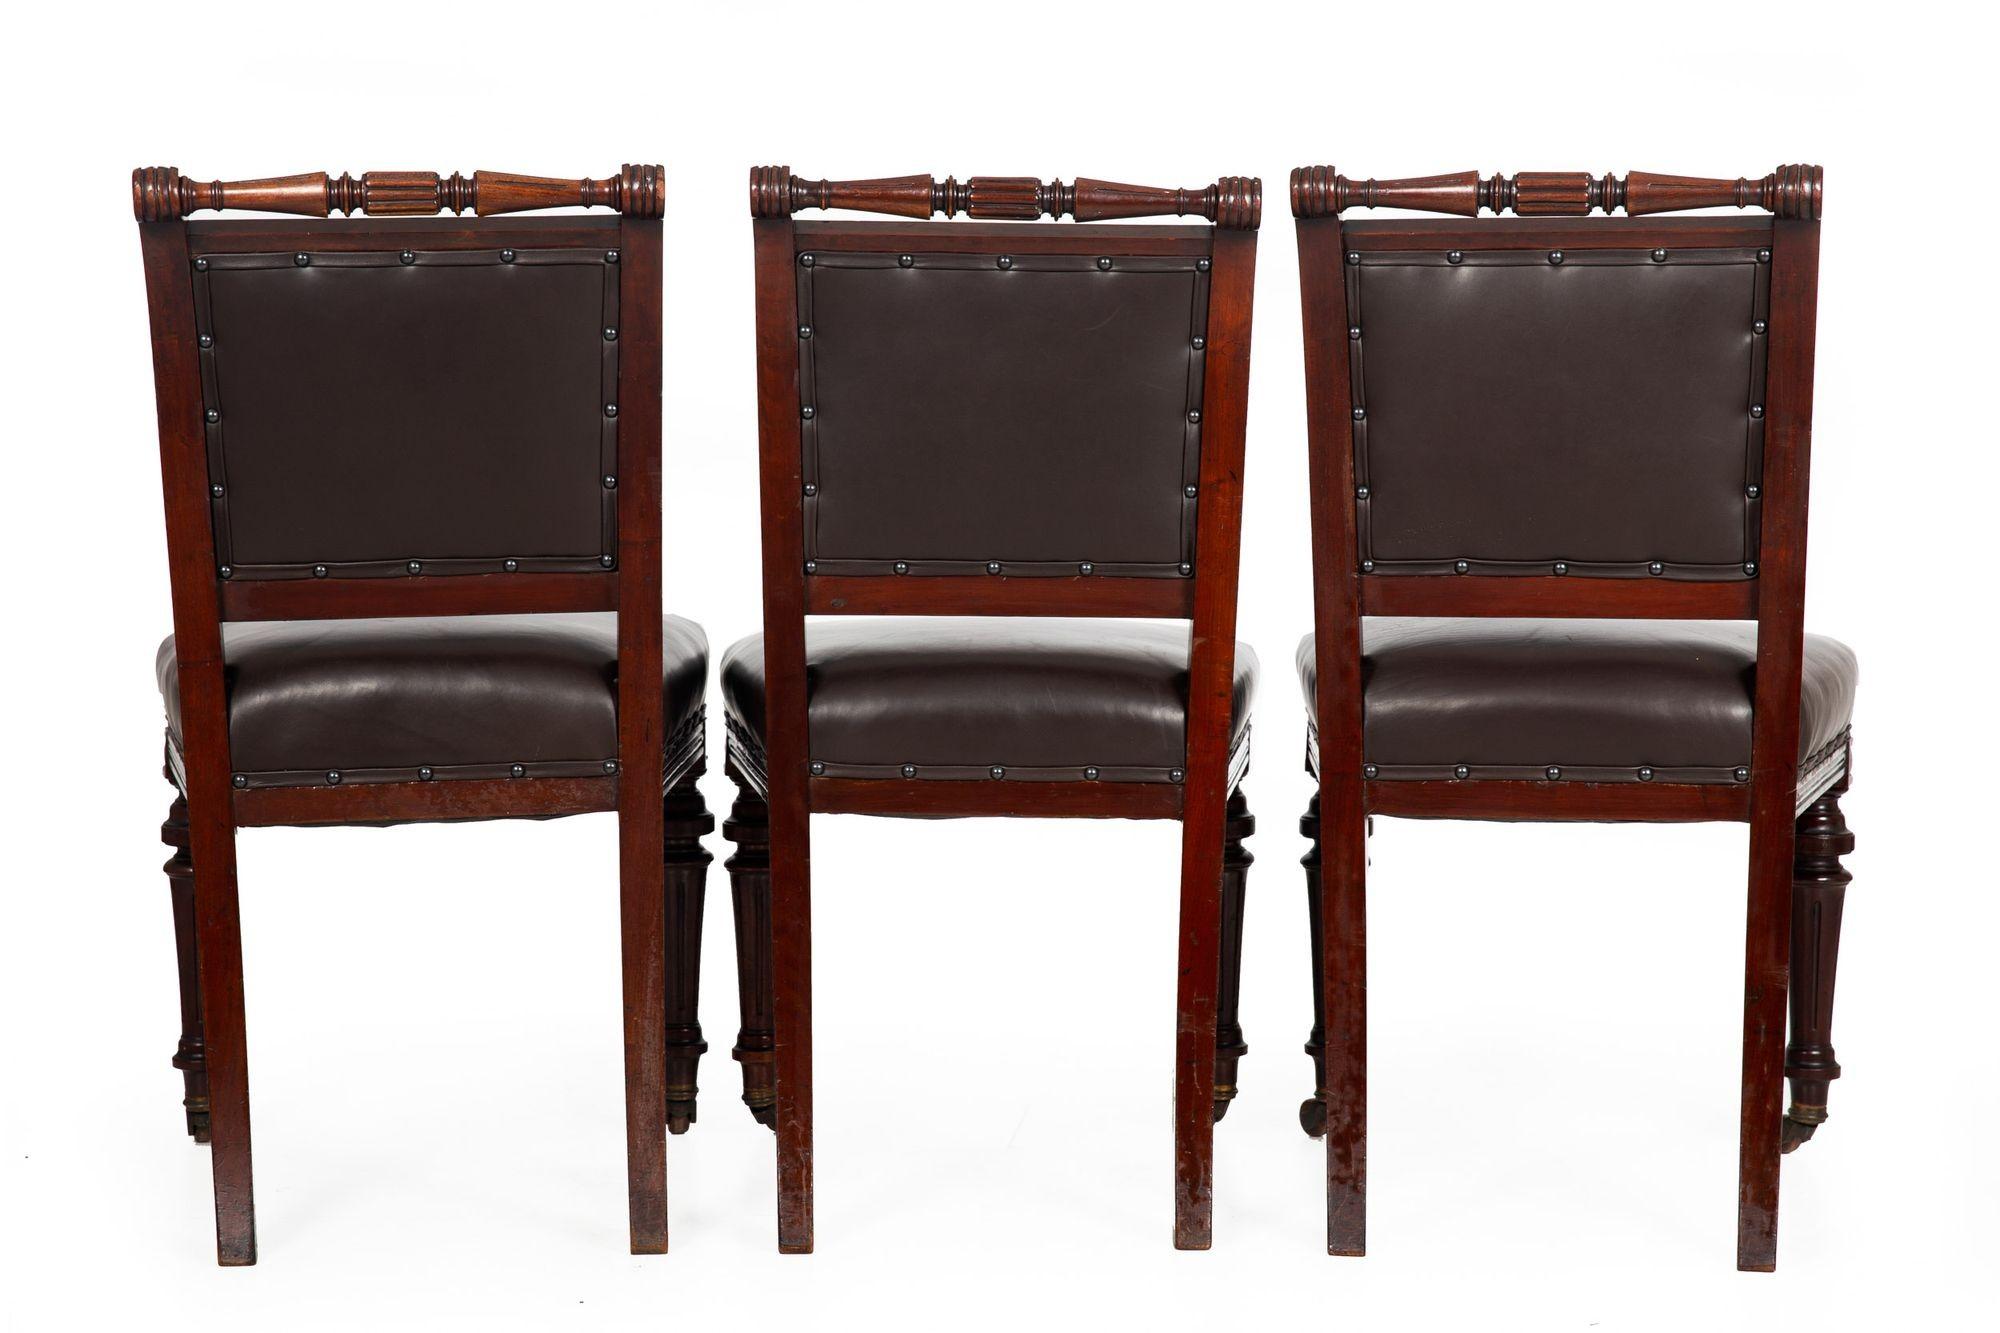 Set of 6 English Antique Mahogany and Leather Dining Chairs, 19th Century 5